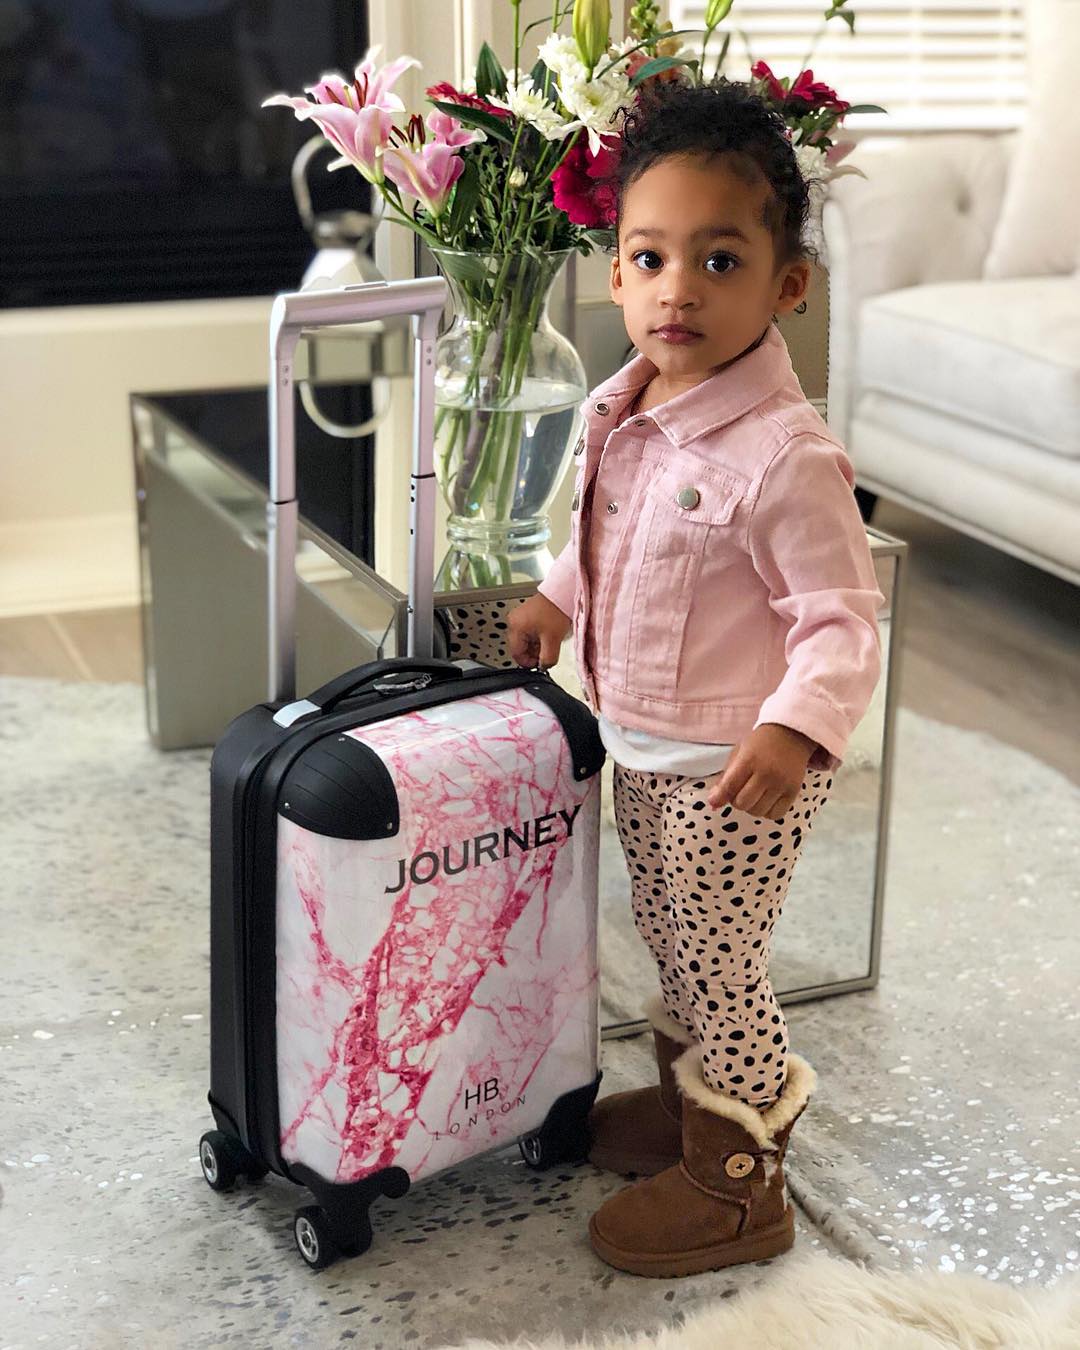 Personalised Pink Cracked Marble Children's Suitcase - HB LONDON